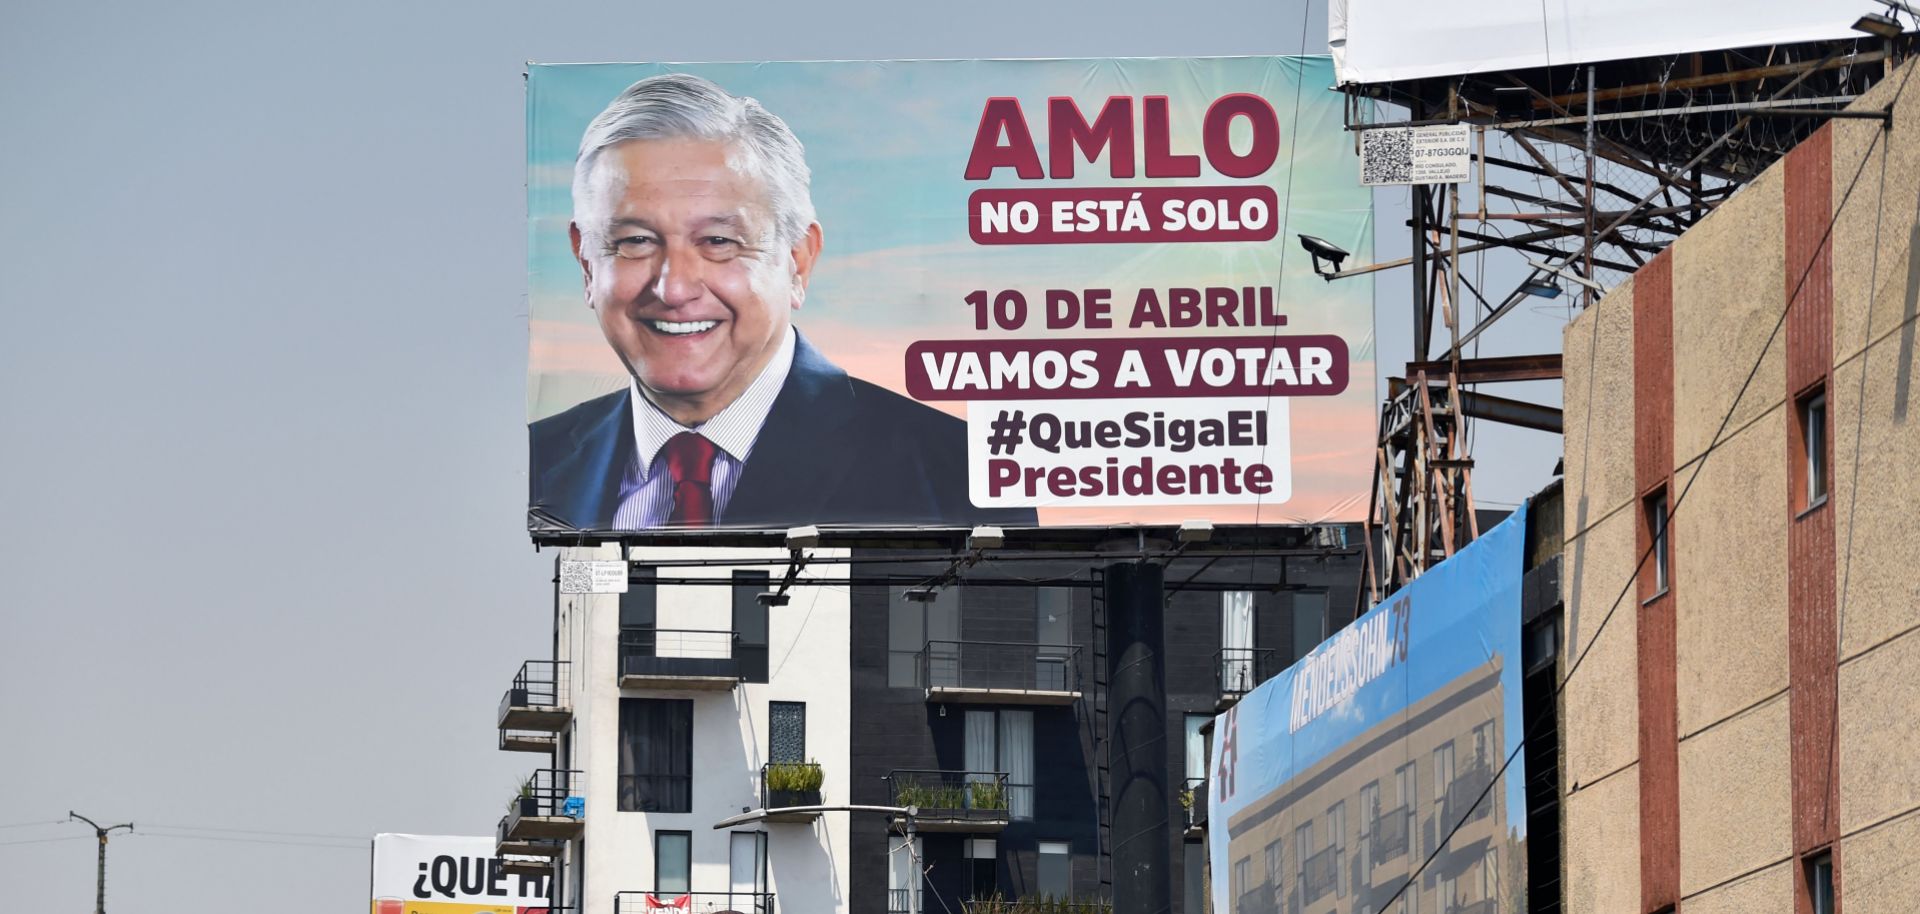 A billboard in Mexico City encourages voters to support Mexican President Andres Manuel Lopez Obrador in the recall referendum scheduled for April 10, 2022. 